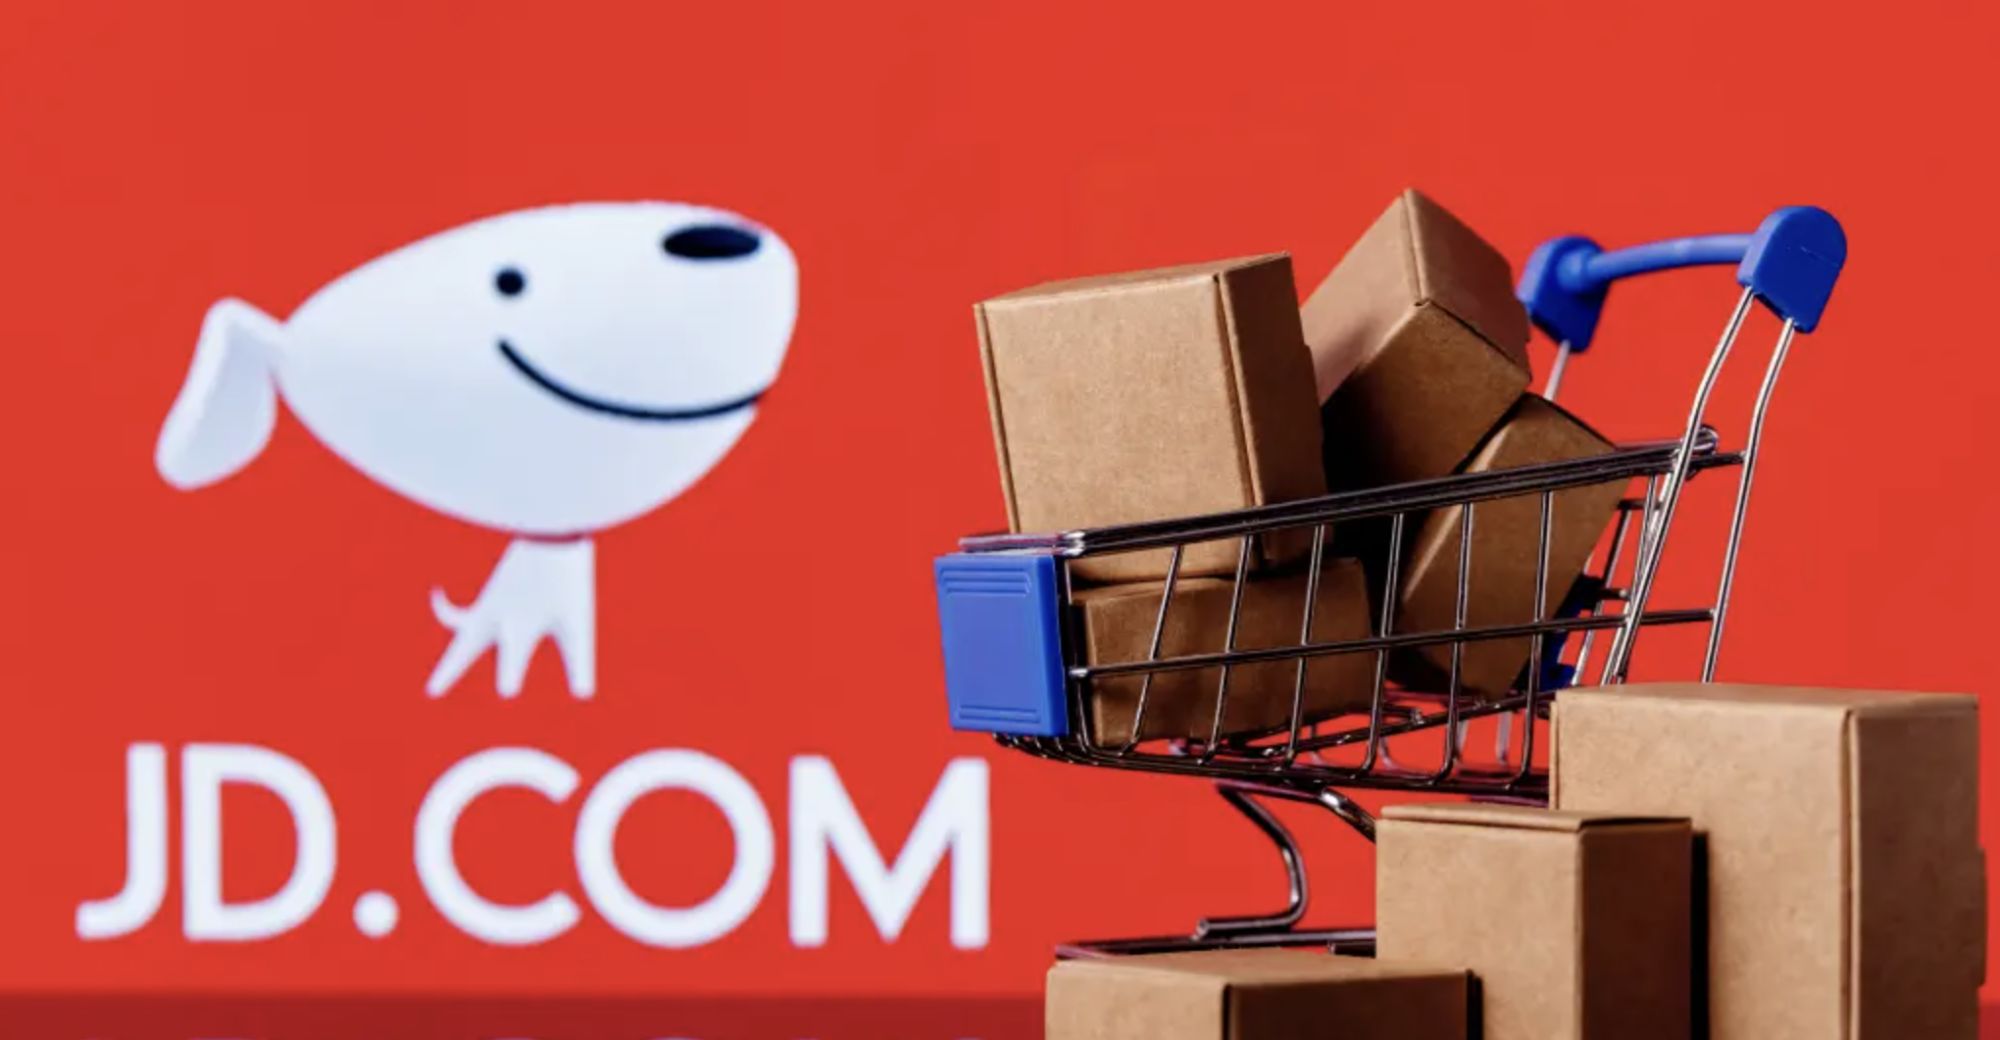 JD.com Announces Significant Salary Increase, Frontline Employees’ Remuneration to Double Next Year